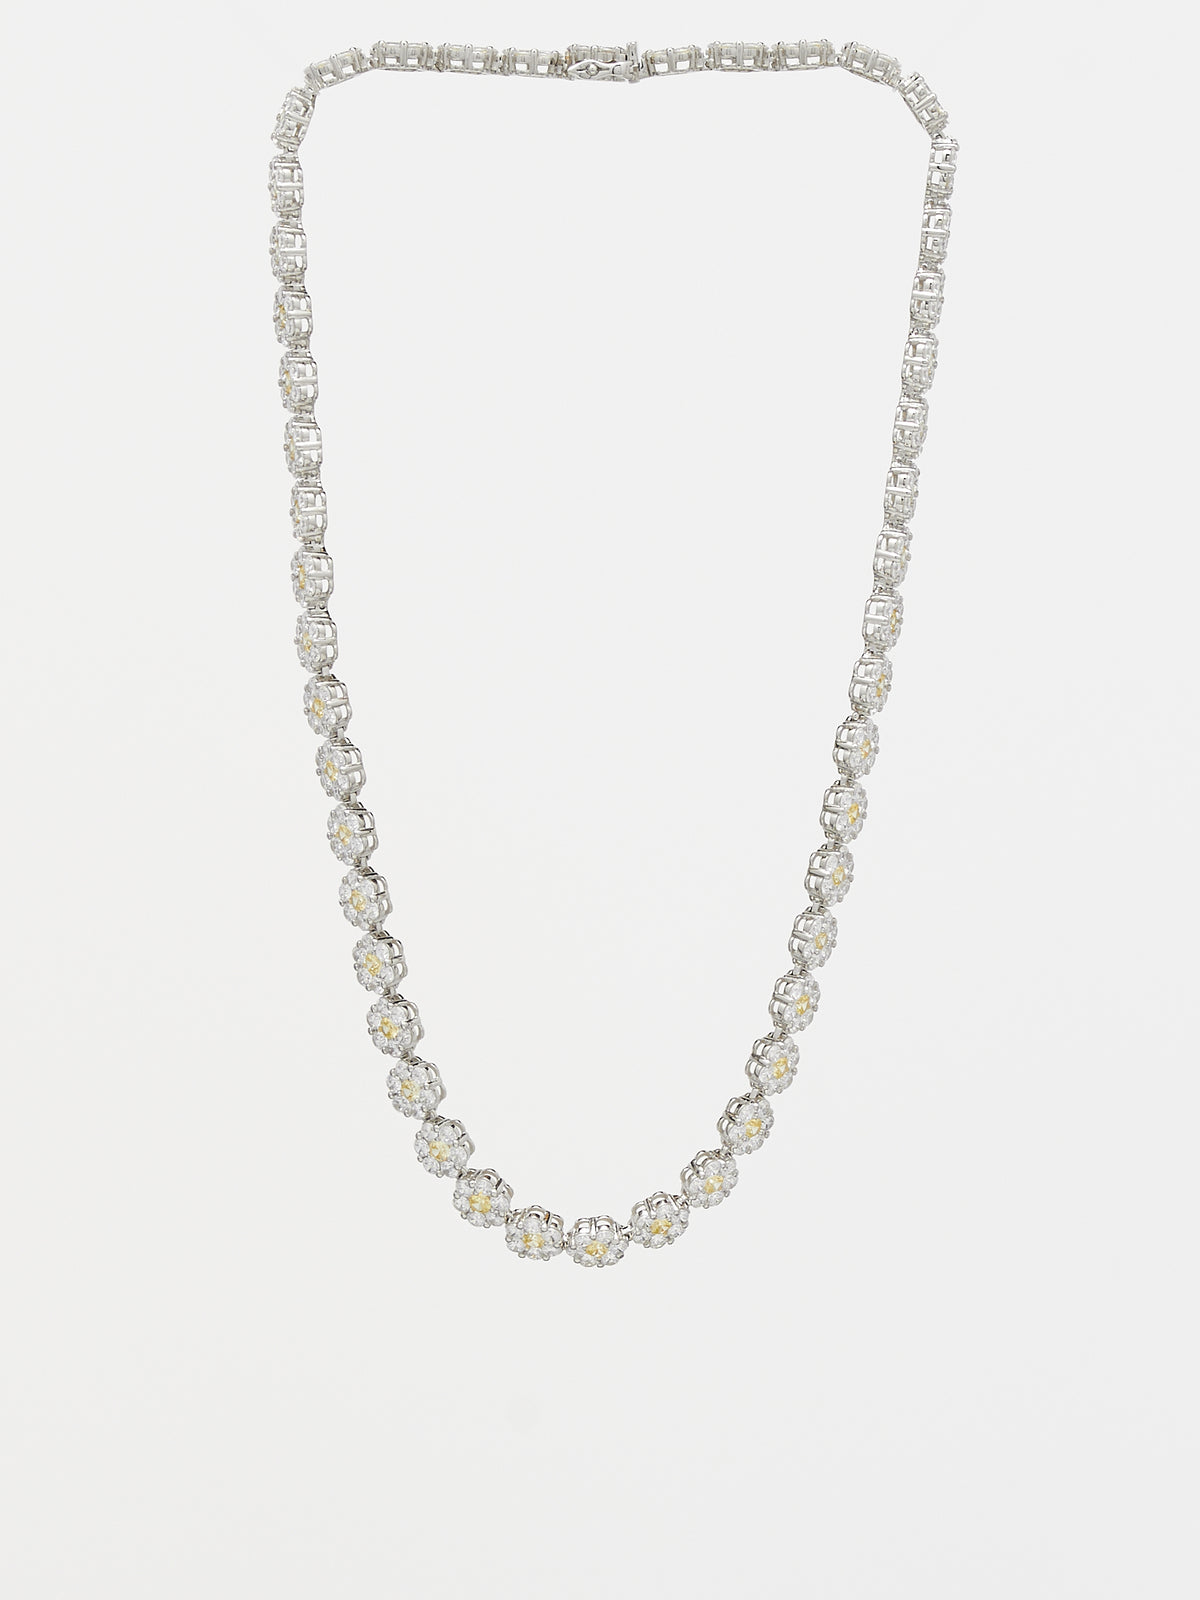 Daisy Tennis Necklace (DAISY-TENNIS-03-STERLING-SILVE)